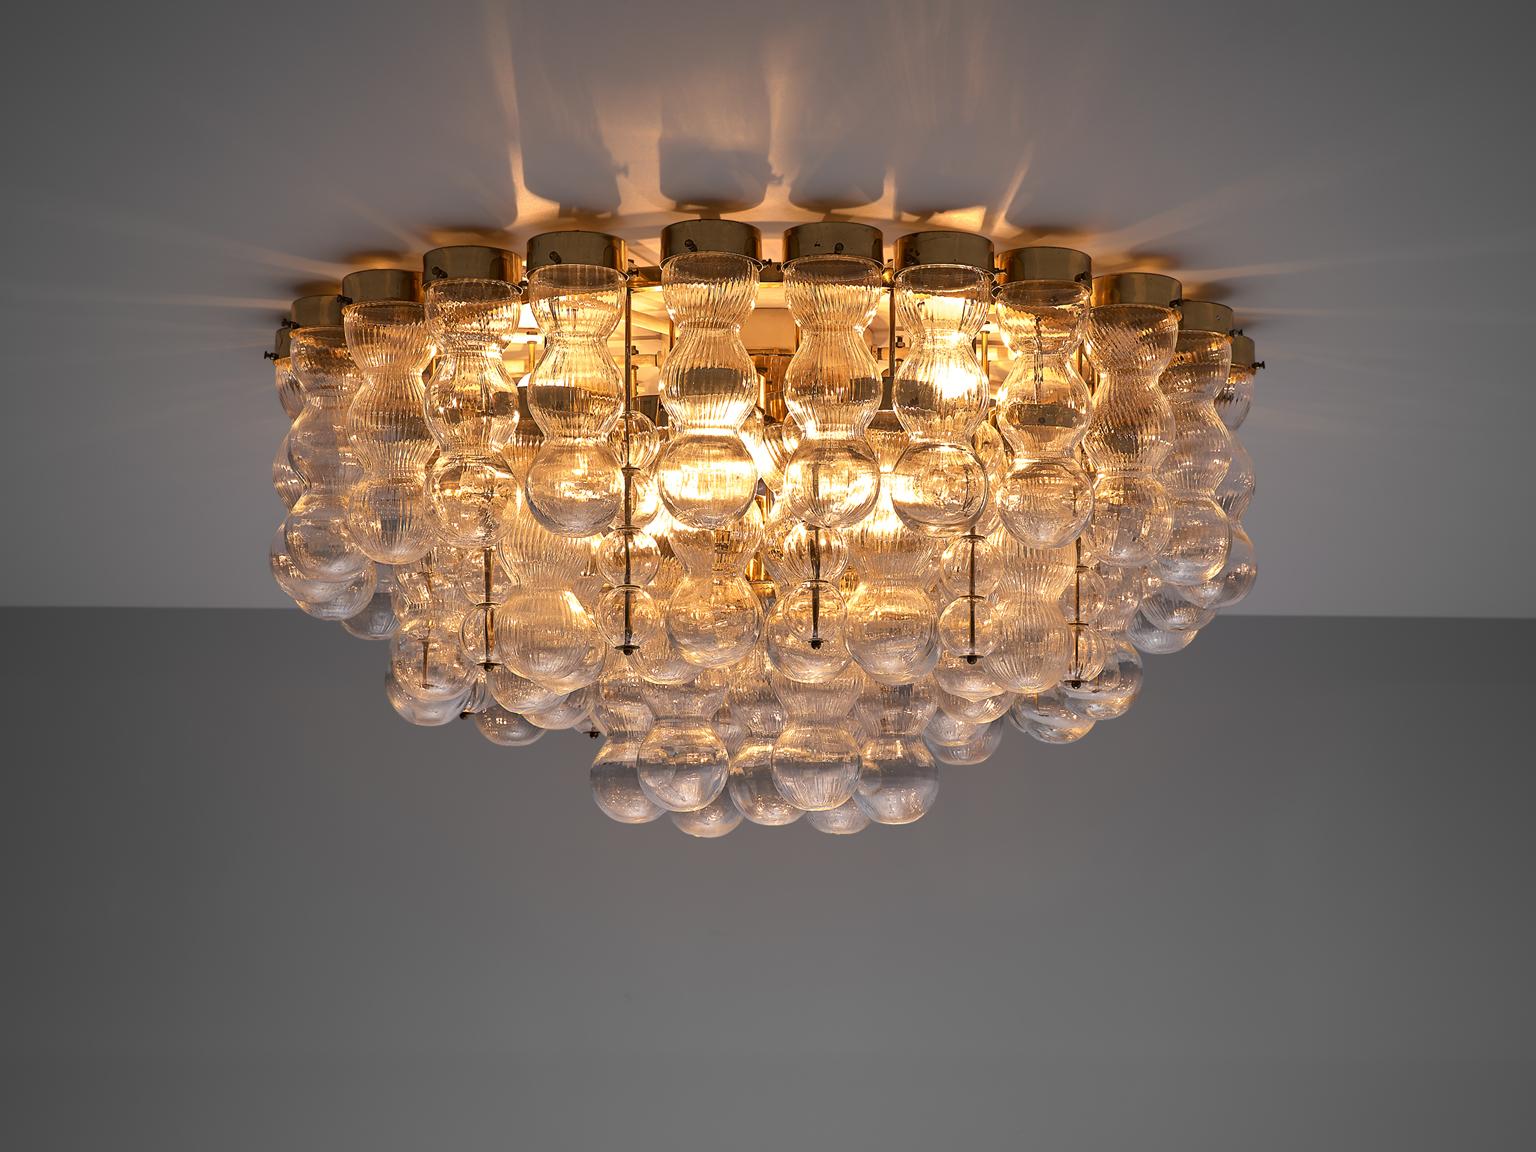 Large chandelier in brass with structured glass, Austria, 1960s.

The chandelier is equipped with six lights and a great amount of 55 glass shades. The shining brass details in combination with the structured glass spheres provides a beautiful